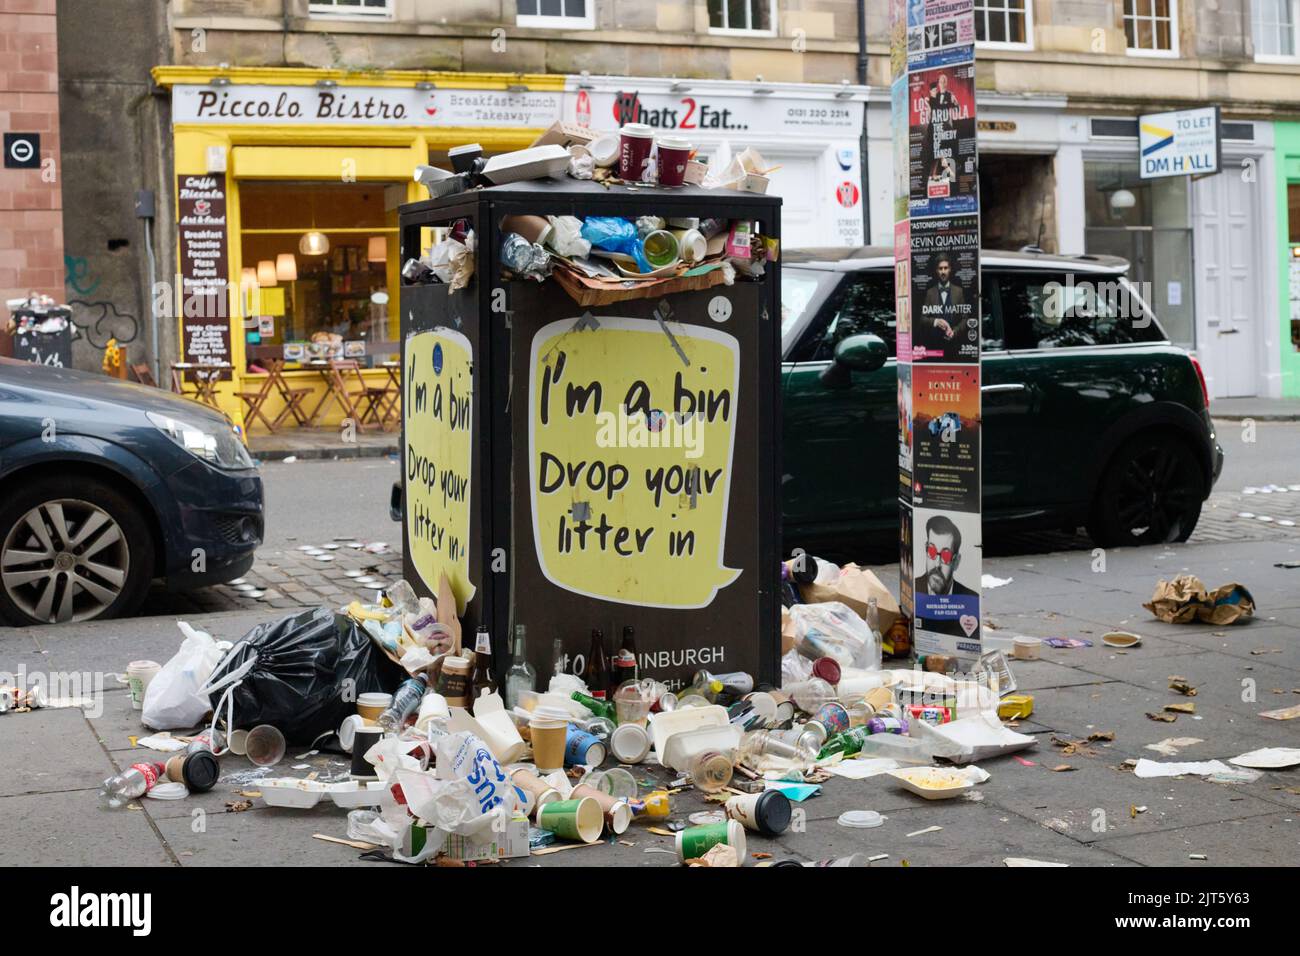 Edinburgh Scotland, UK. 28th Aug, 2022. Bins overflow with litter in the city centre due to strike action by workers. Credit: SST/Alamy Live News Stock Photo